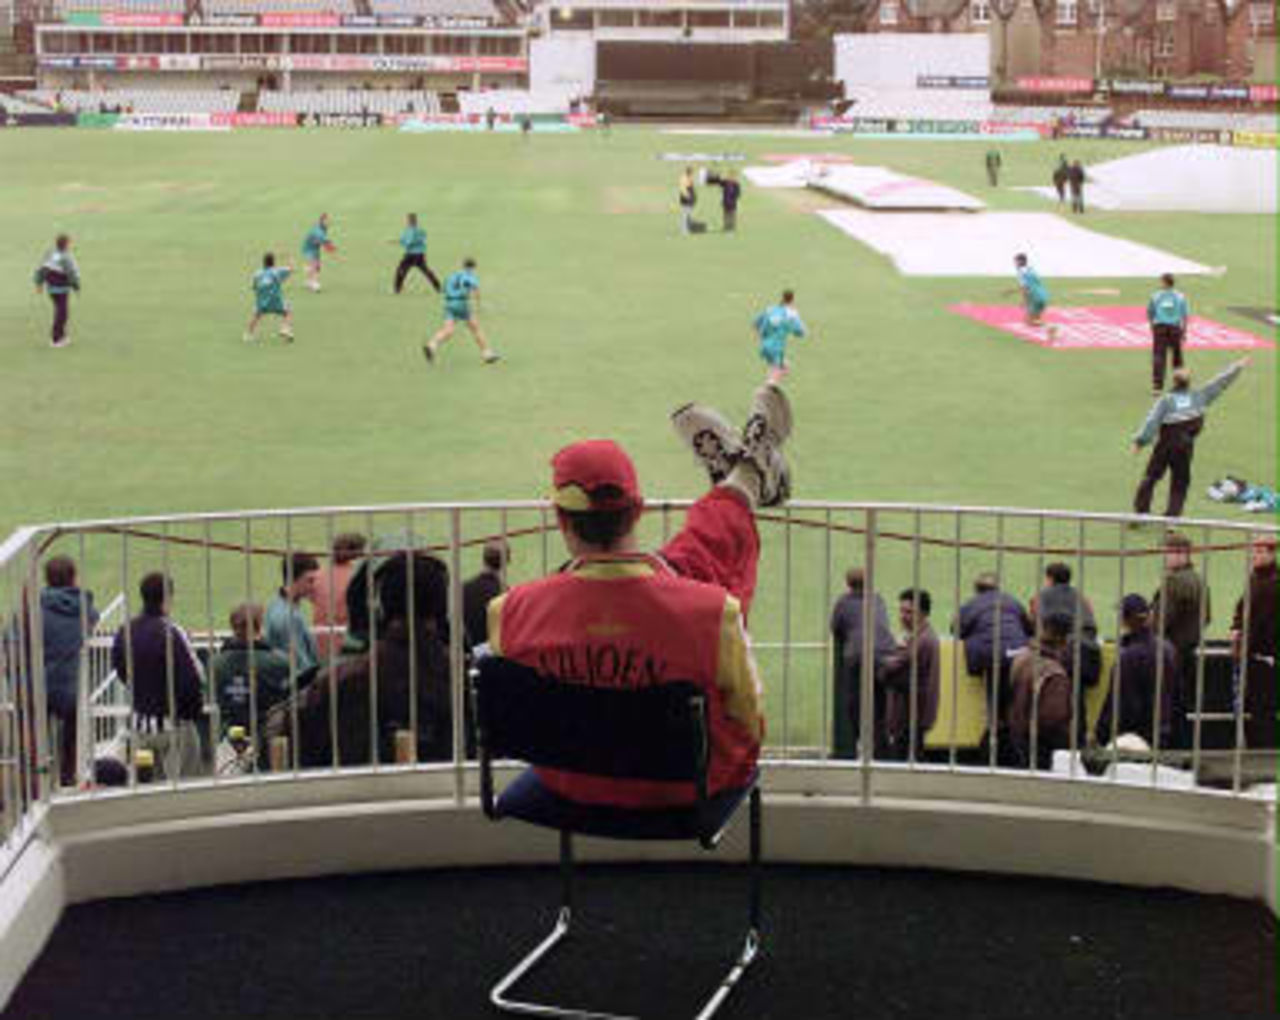 The New Zealand team plays frisbee on the field while Dirk Viljoen of Zimbabwe watches from the balcony as the Zimbabwe v New Zealand Cricket World Cup Super Six match was rained off again at Headingley for the second day in a row.